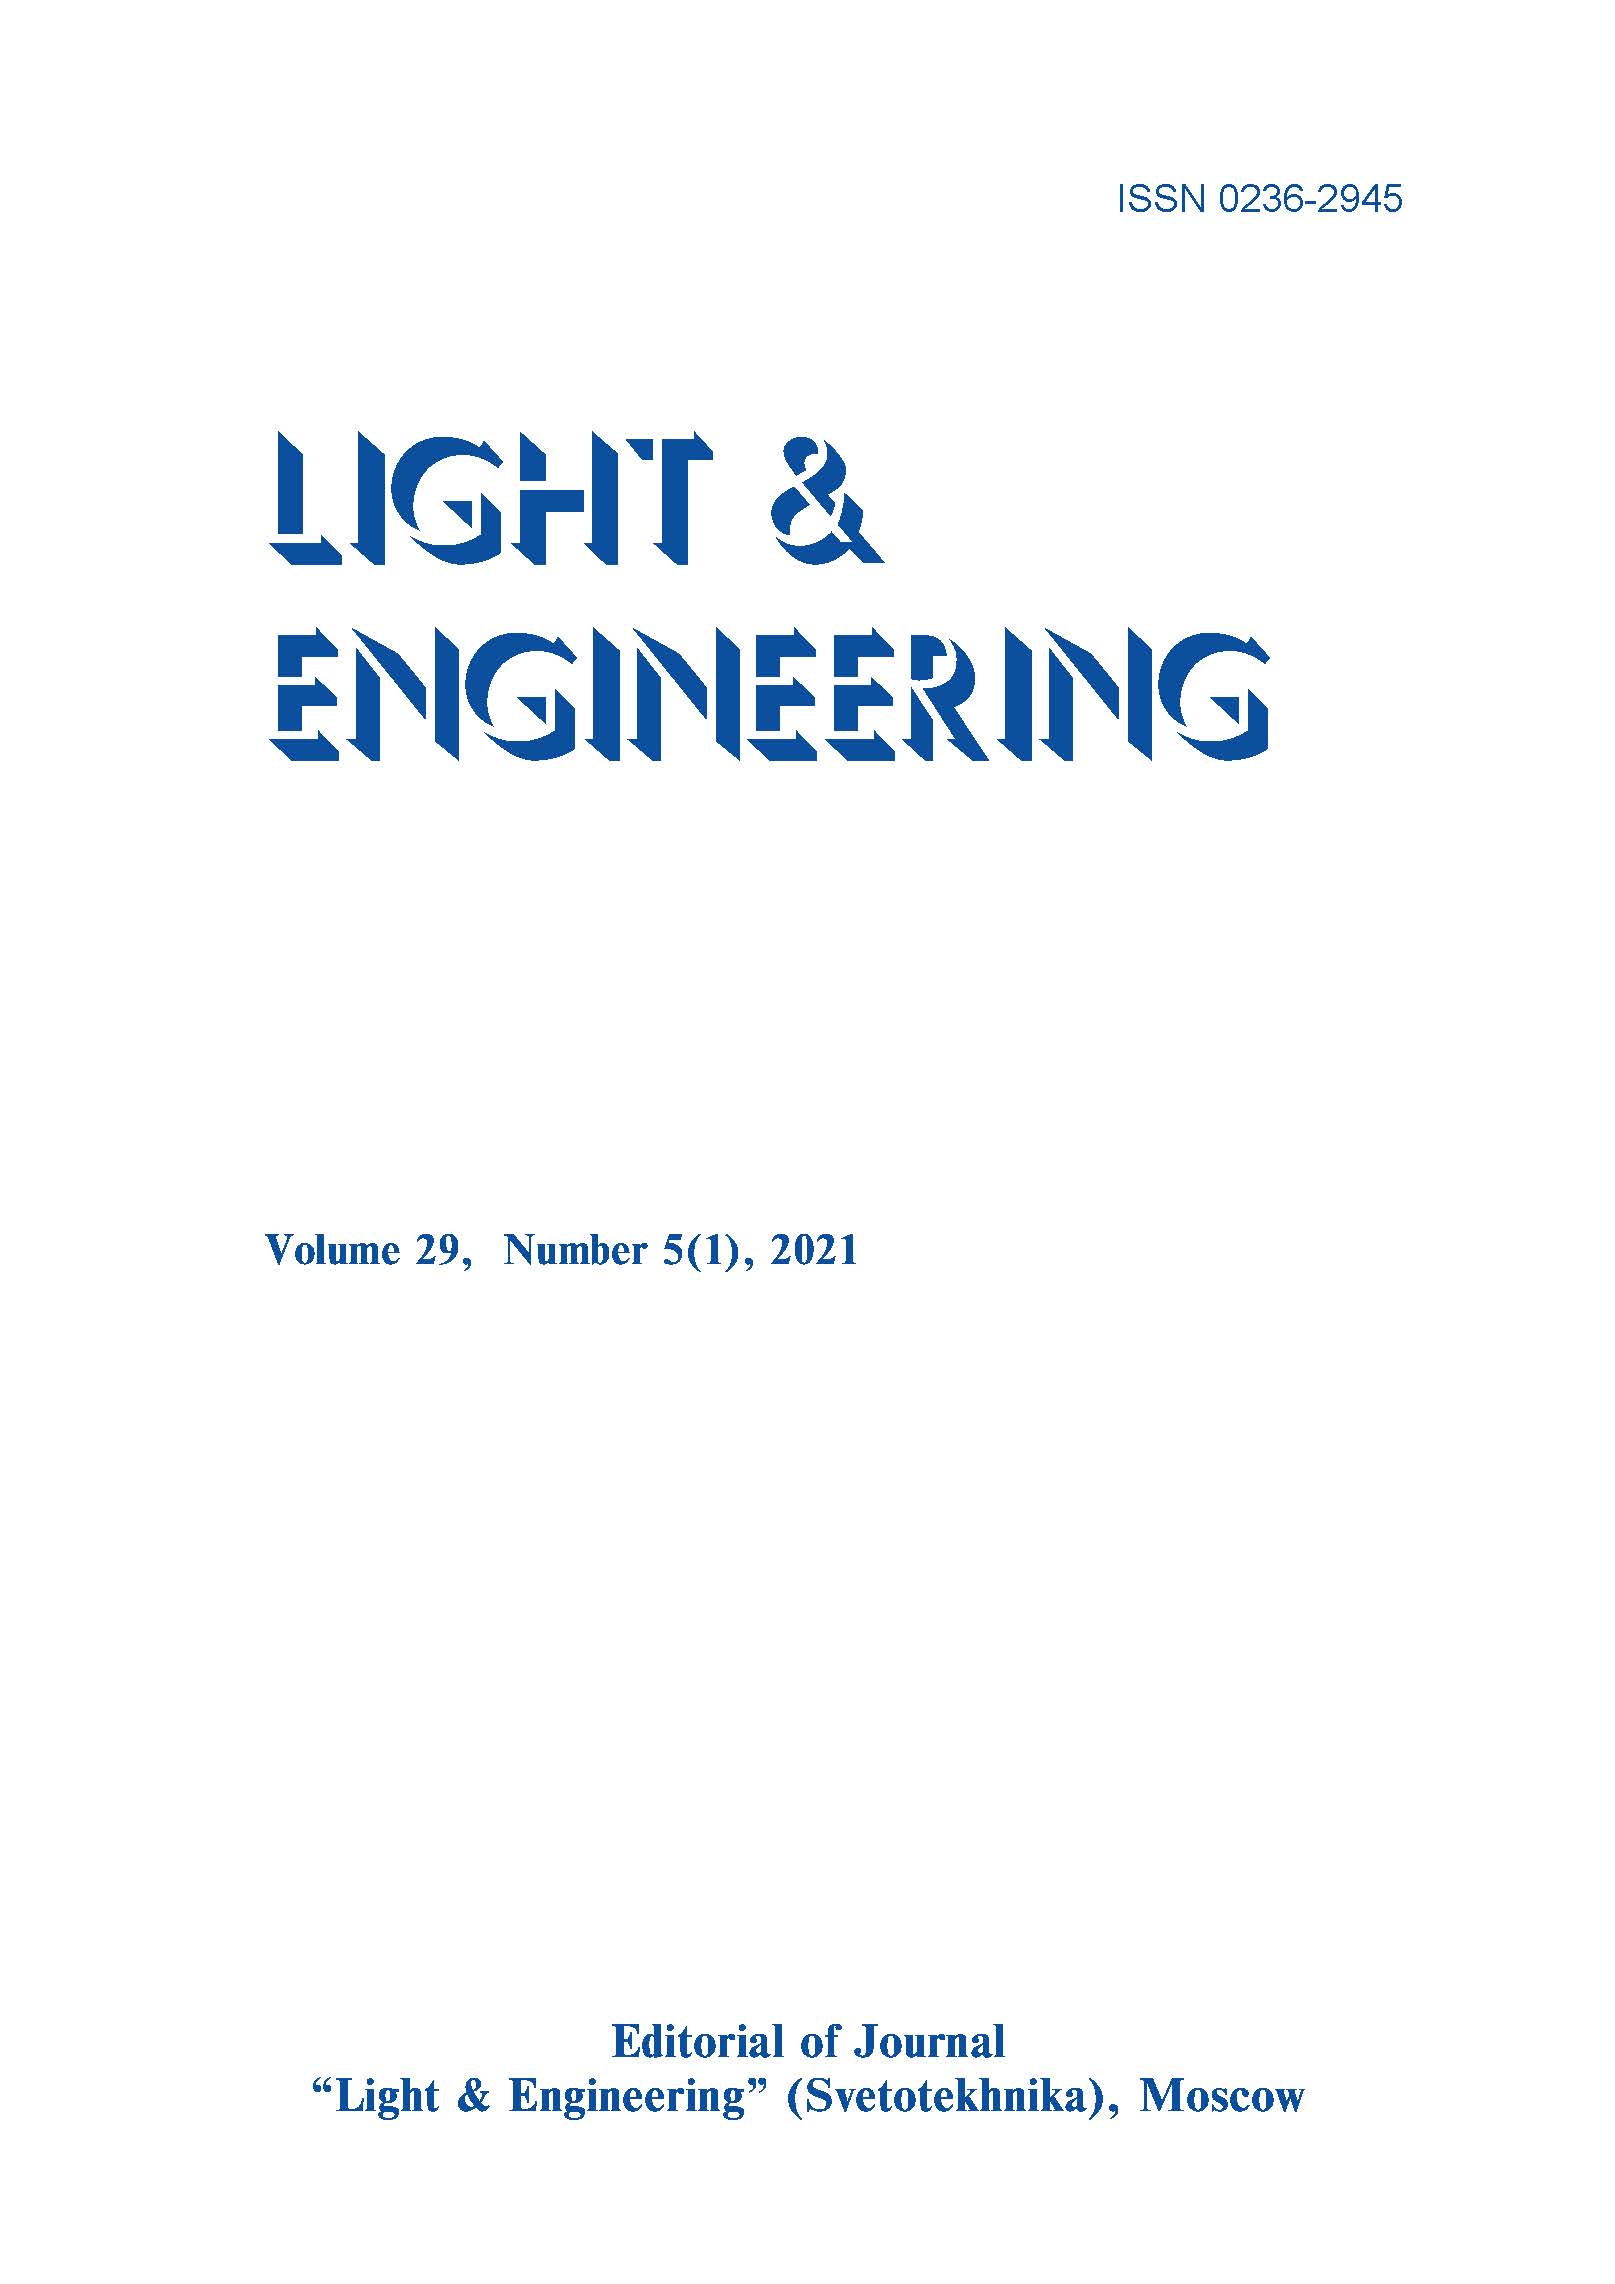 Prerequisites for the Calculation of Natural Lighting of Premises Taking into Account the Insolation Component in the Region of Equatorial Latitudes L&E, Vol. 29, No. 5 (1), 2021